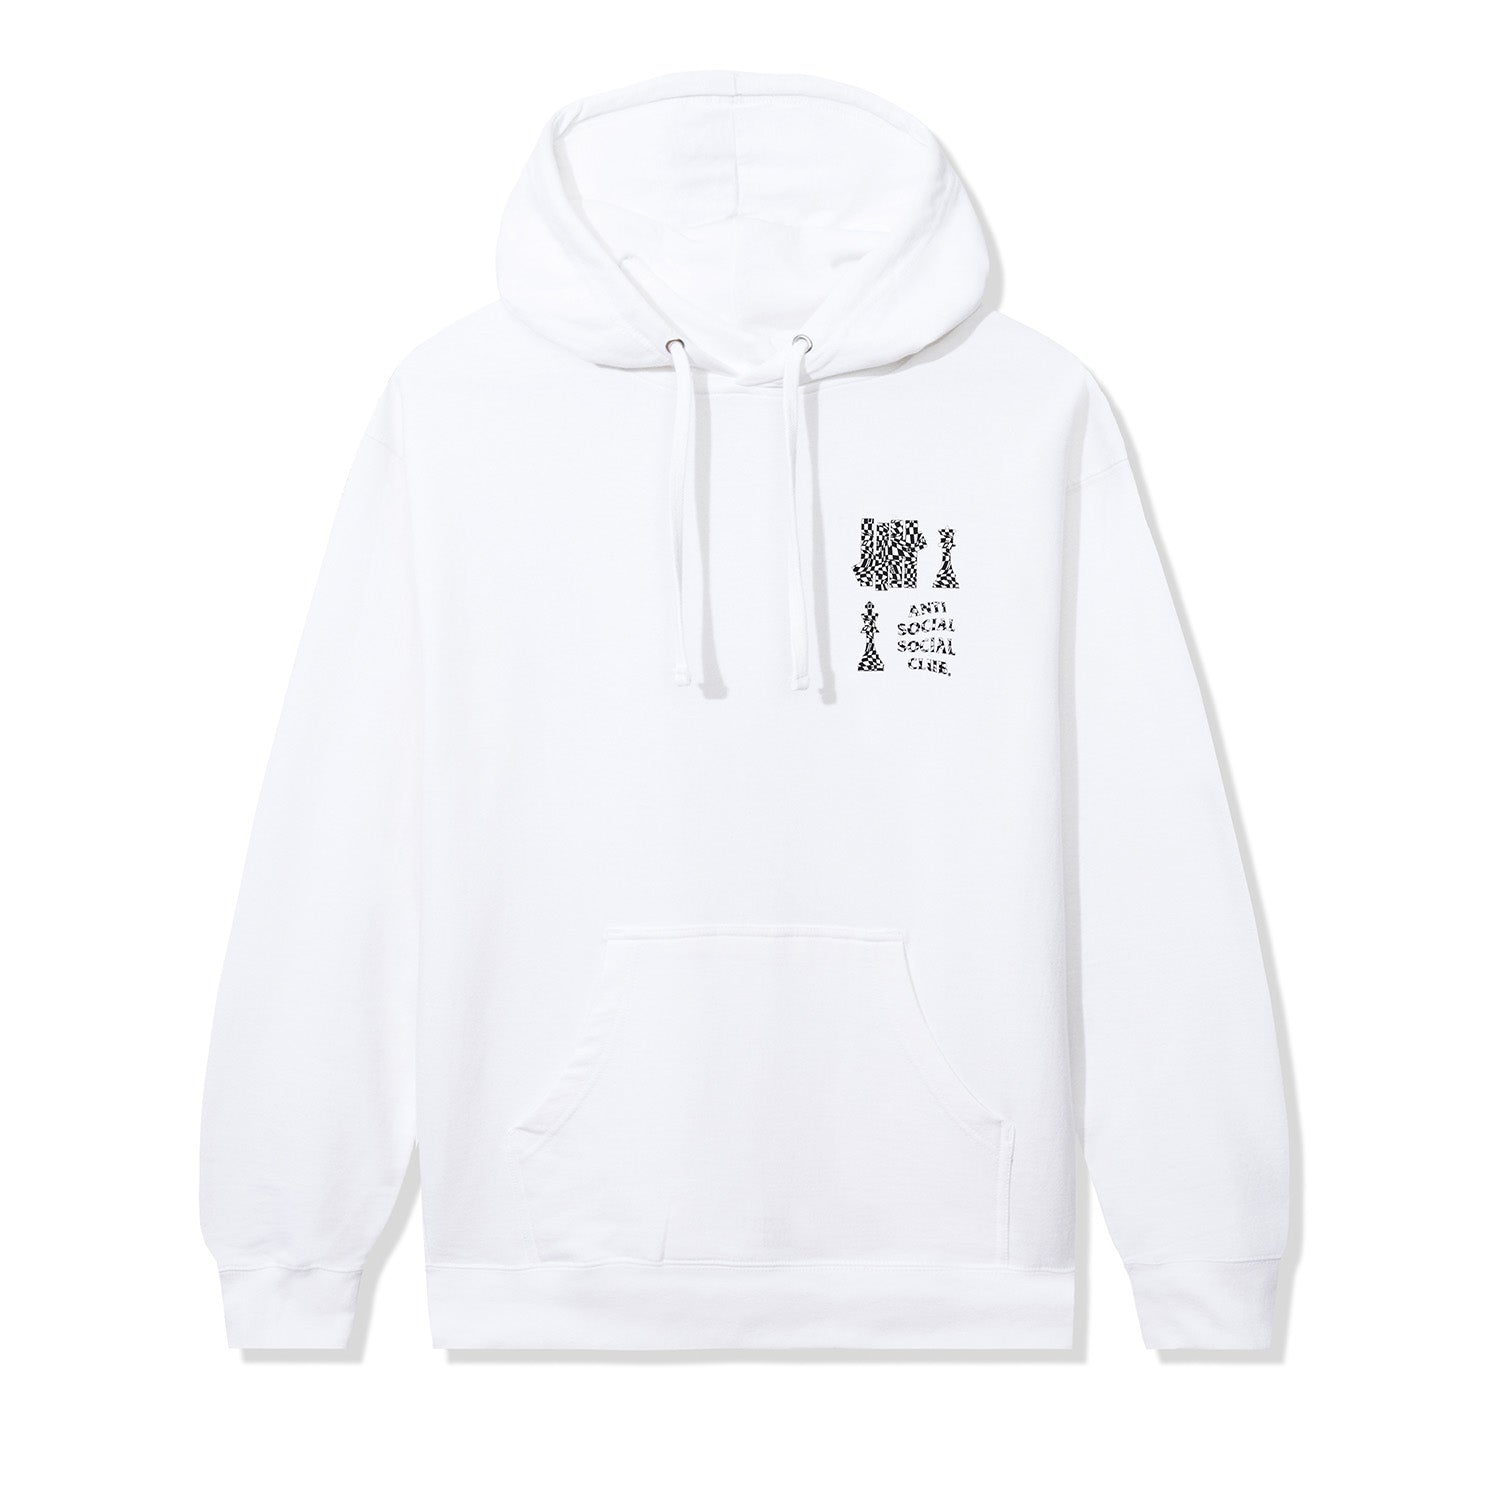 ASSC x Undefeated Submission Hoodie